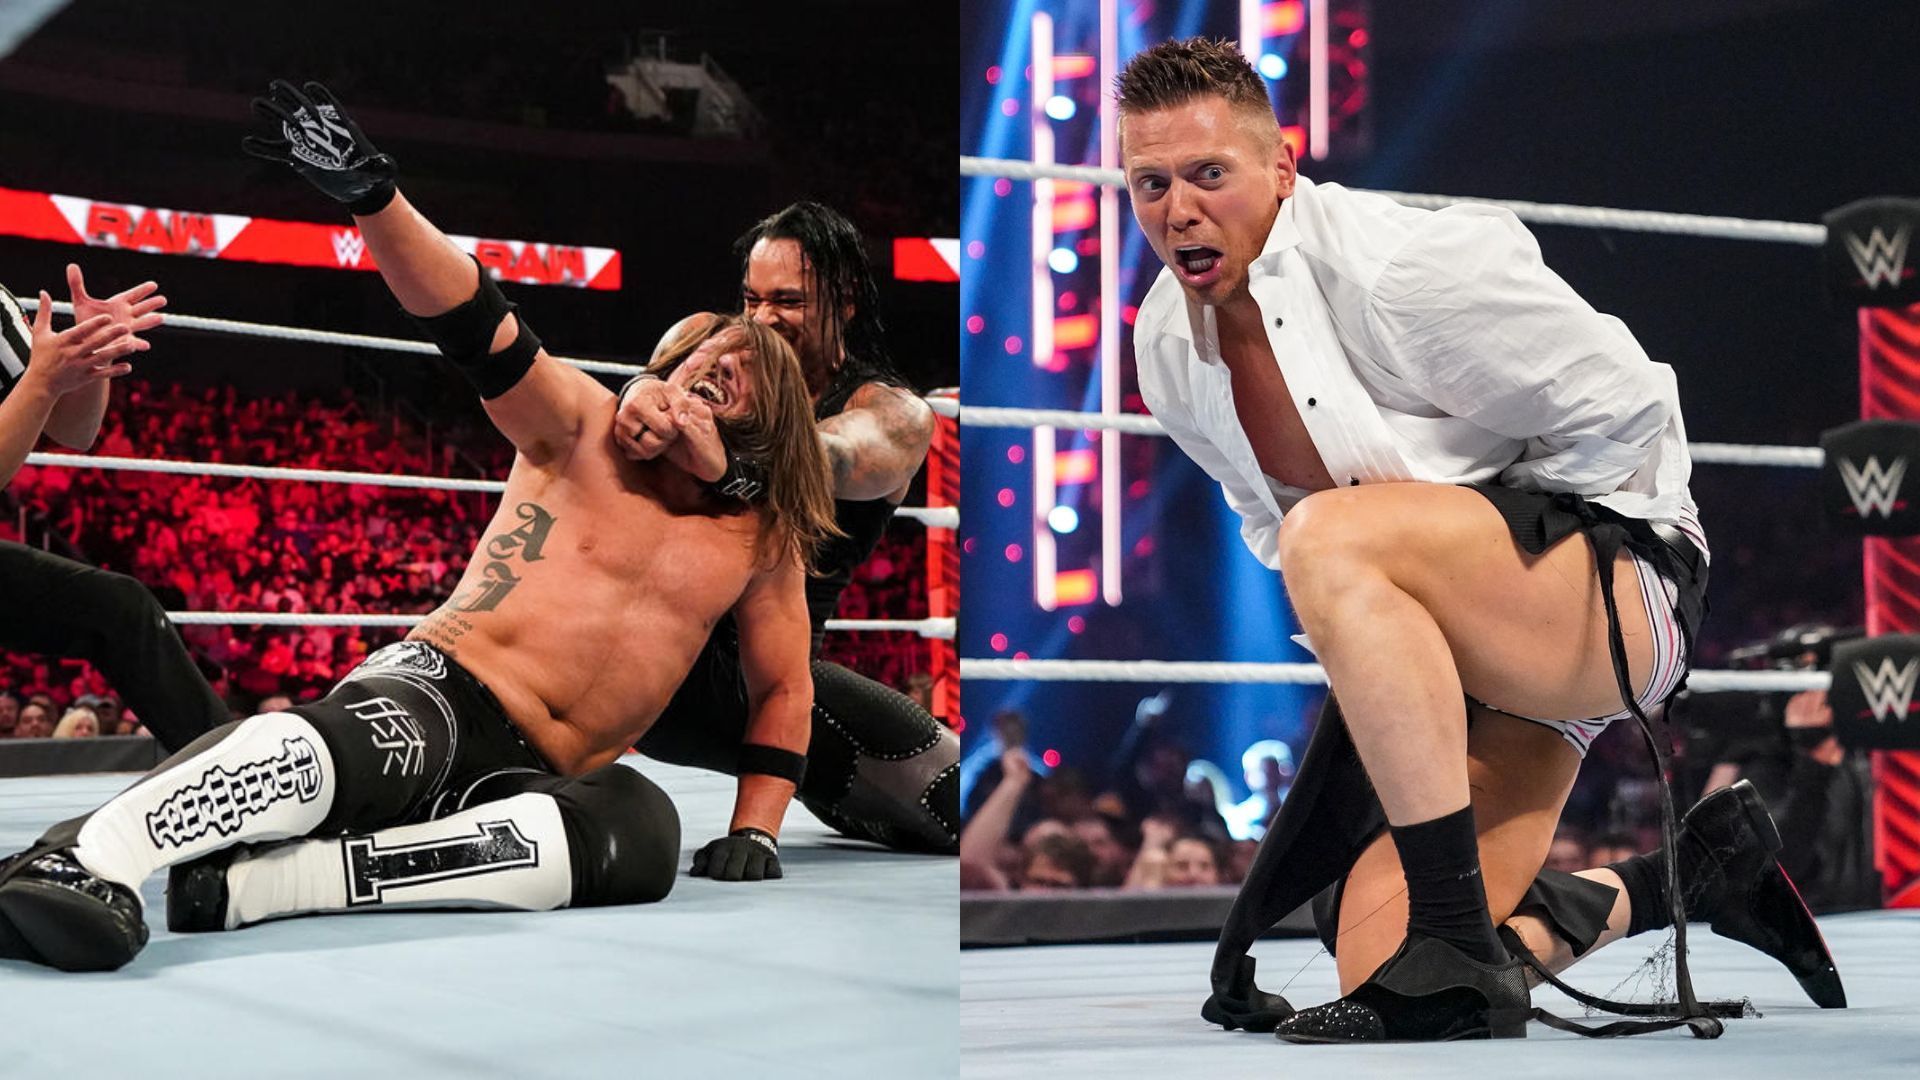 Some WWE Superstars would benefit from a new beginning